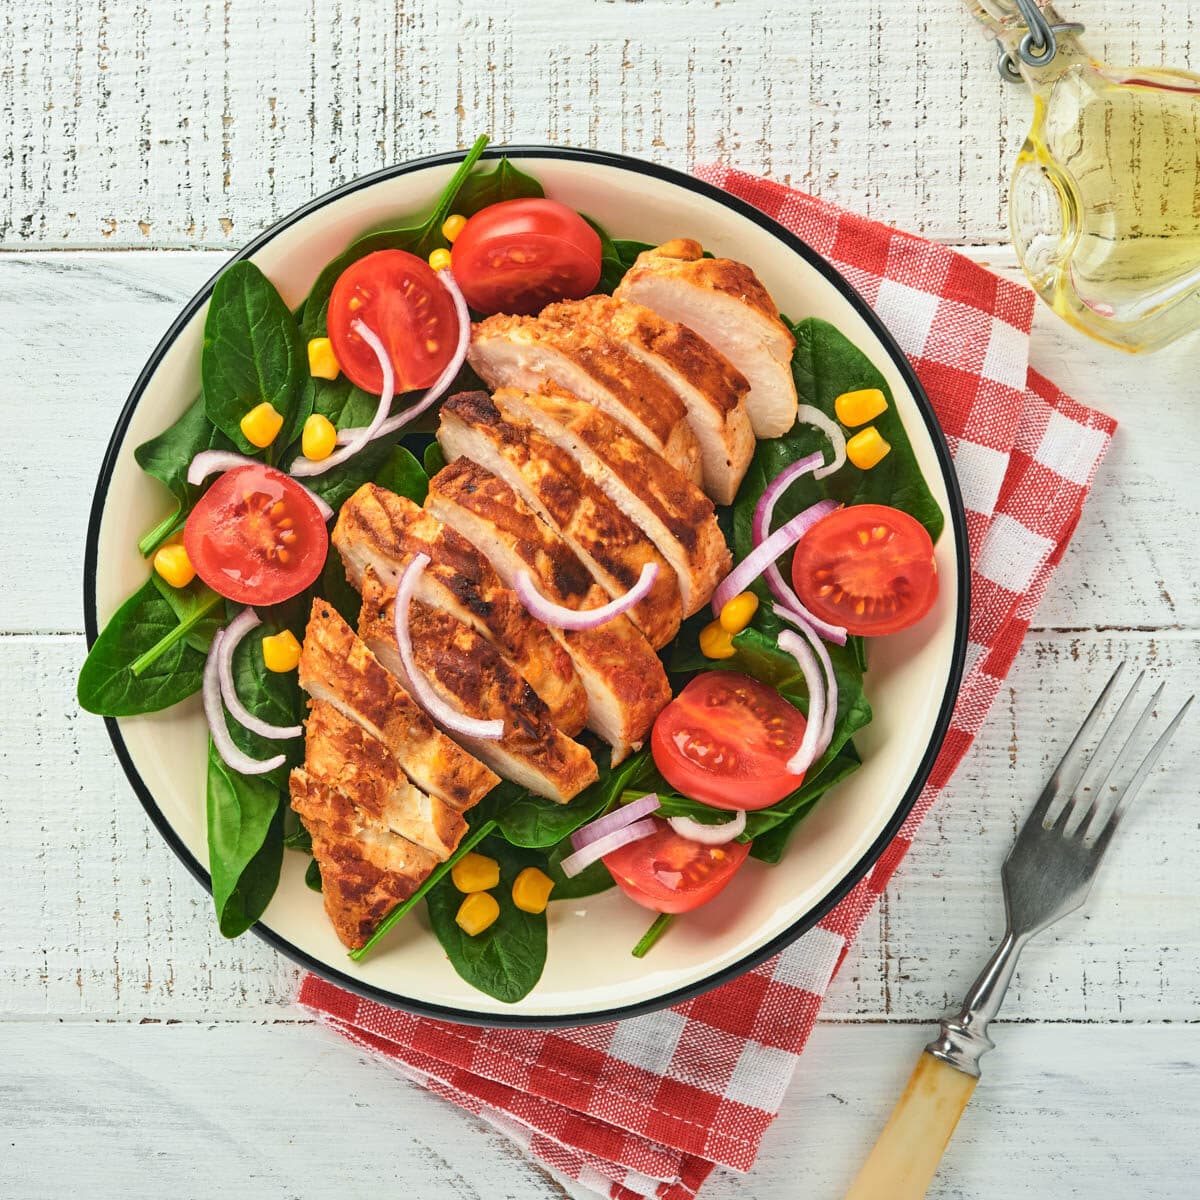 Spinach salad with fresh tomatoes and grilled chicken.